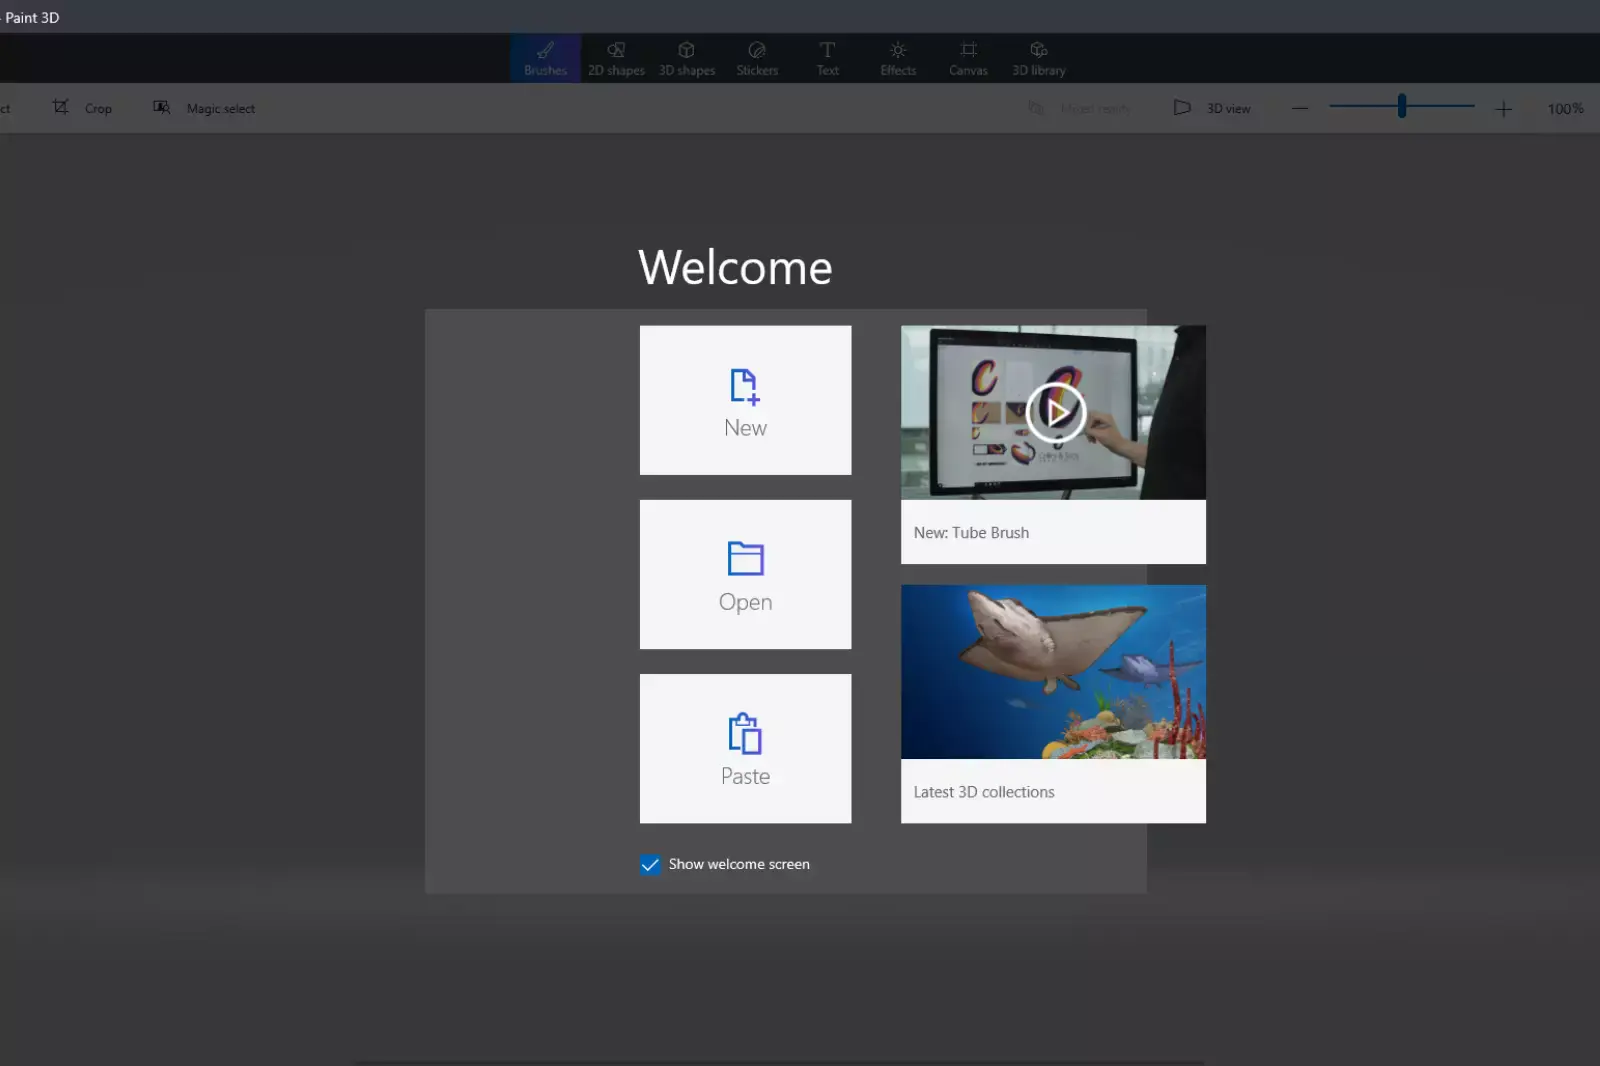 Home Screen of Paint 3D